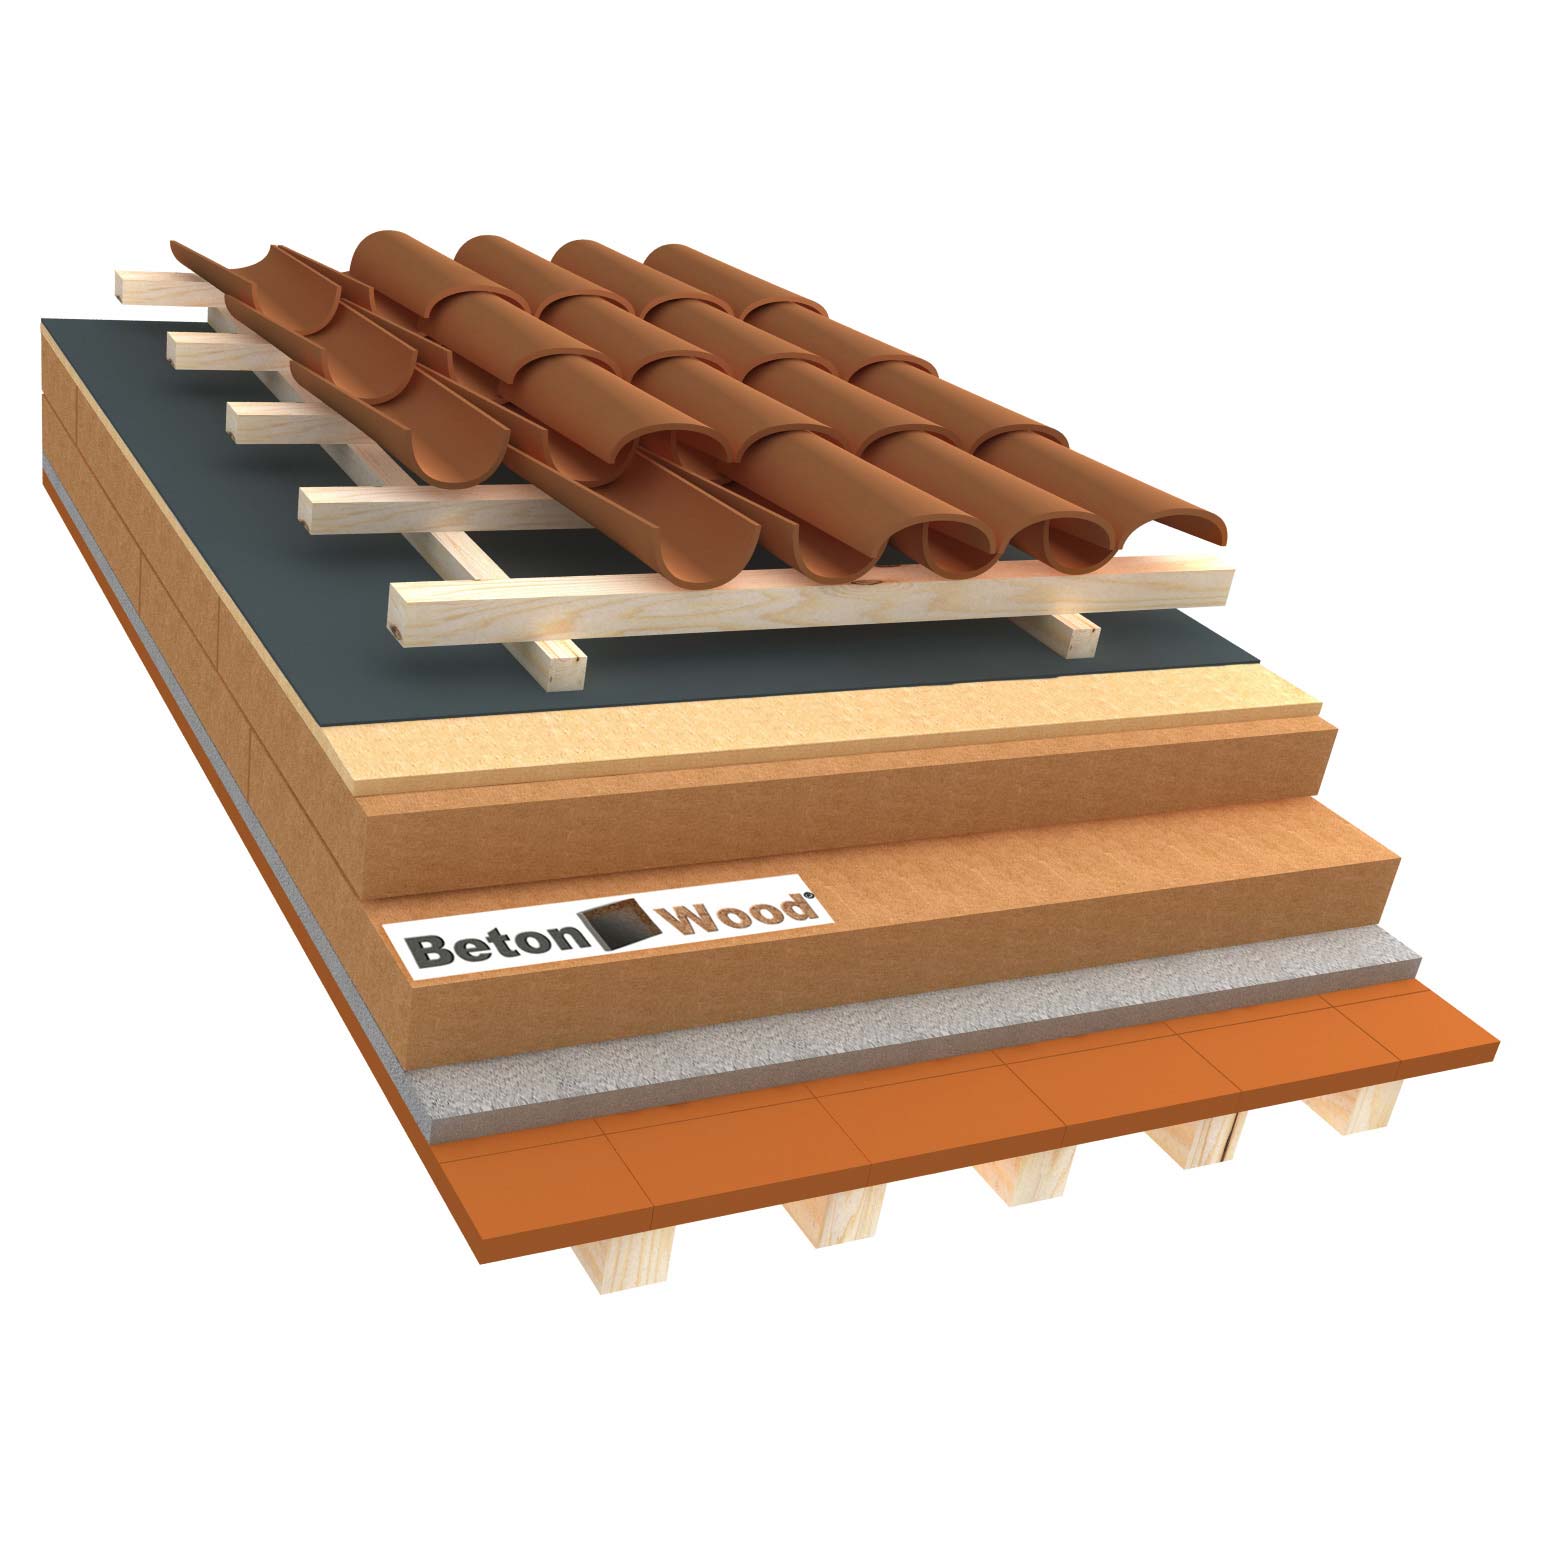 Ventilated roof with fiber wood Isorel and Special dry on terracotta tiles